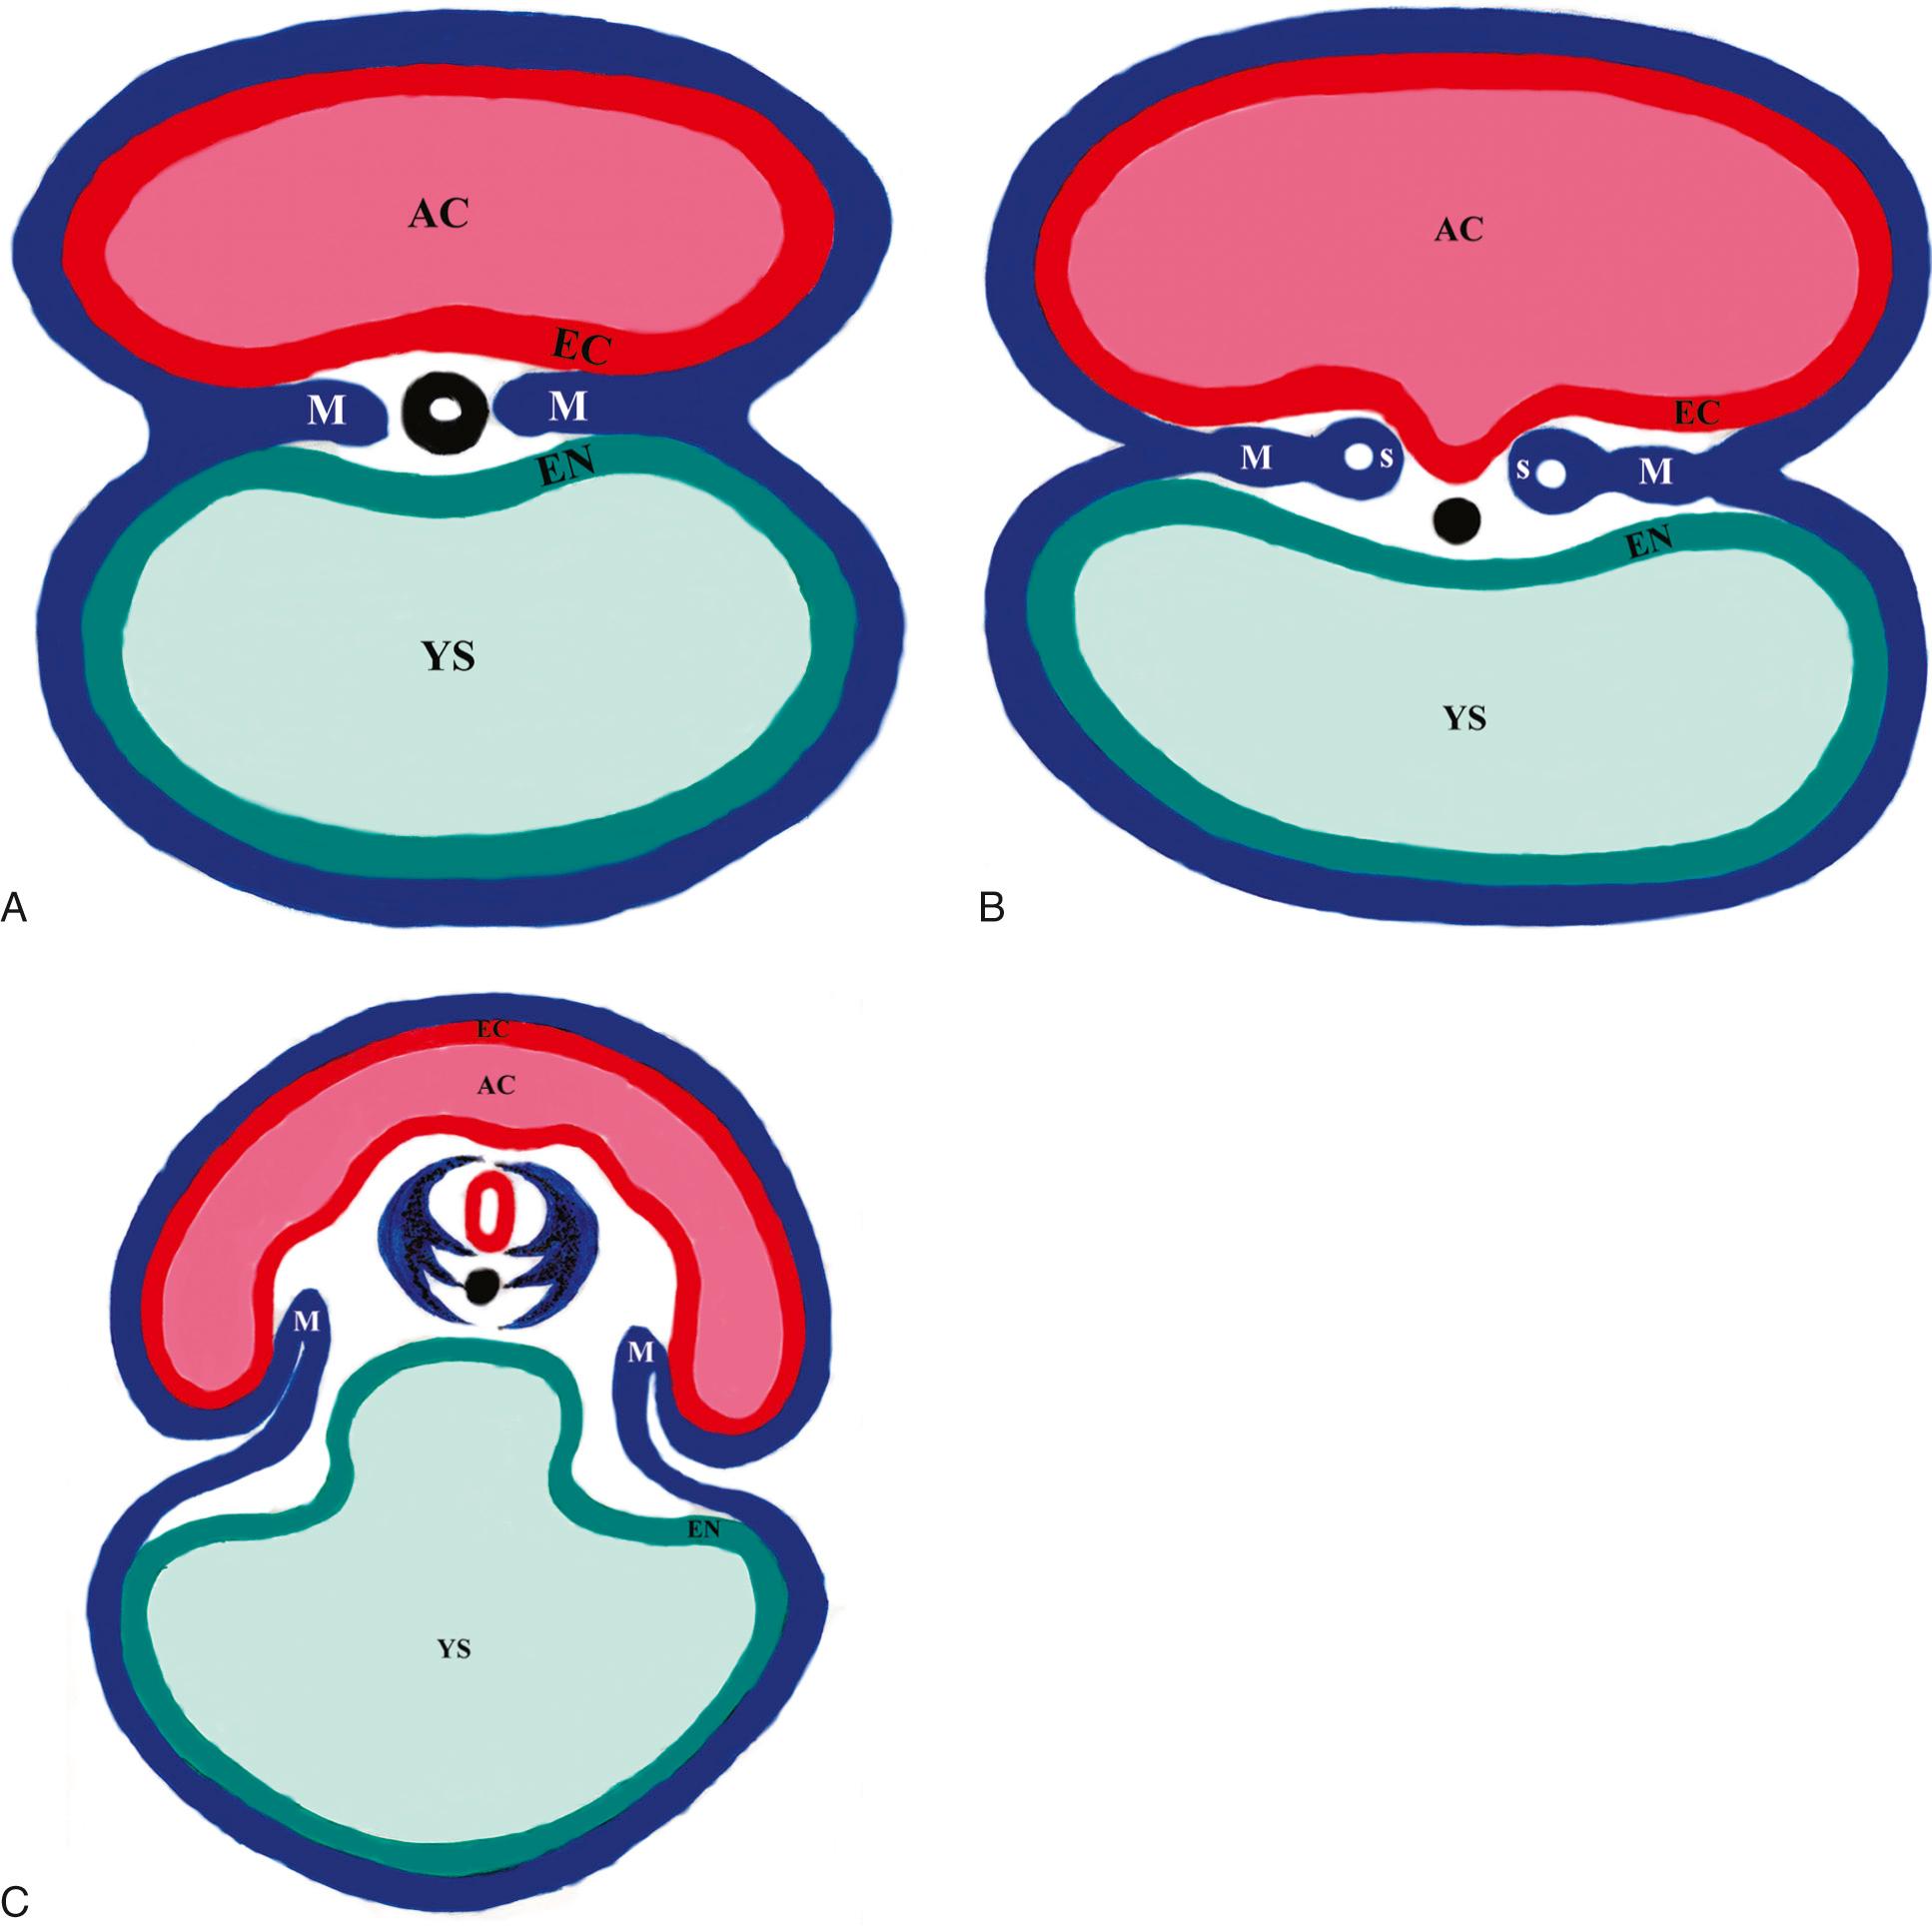 FIG. 35.1, Cross Section of Trilaminar Embryonic Disc (Germ Disc).